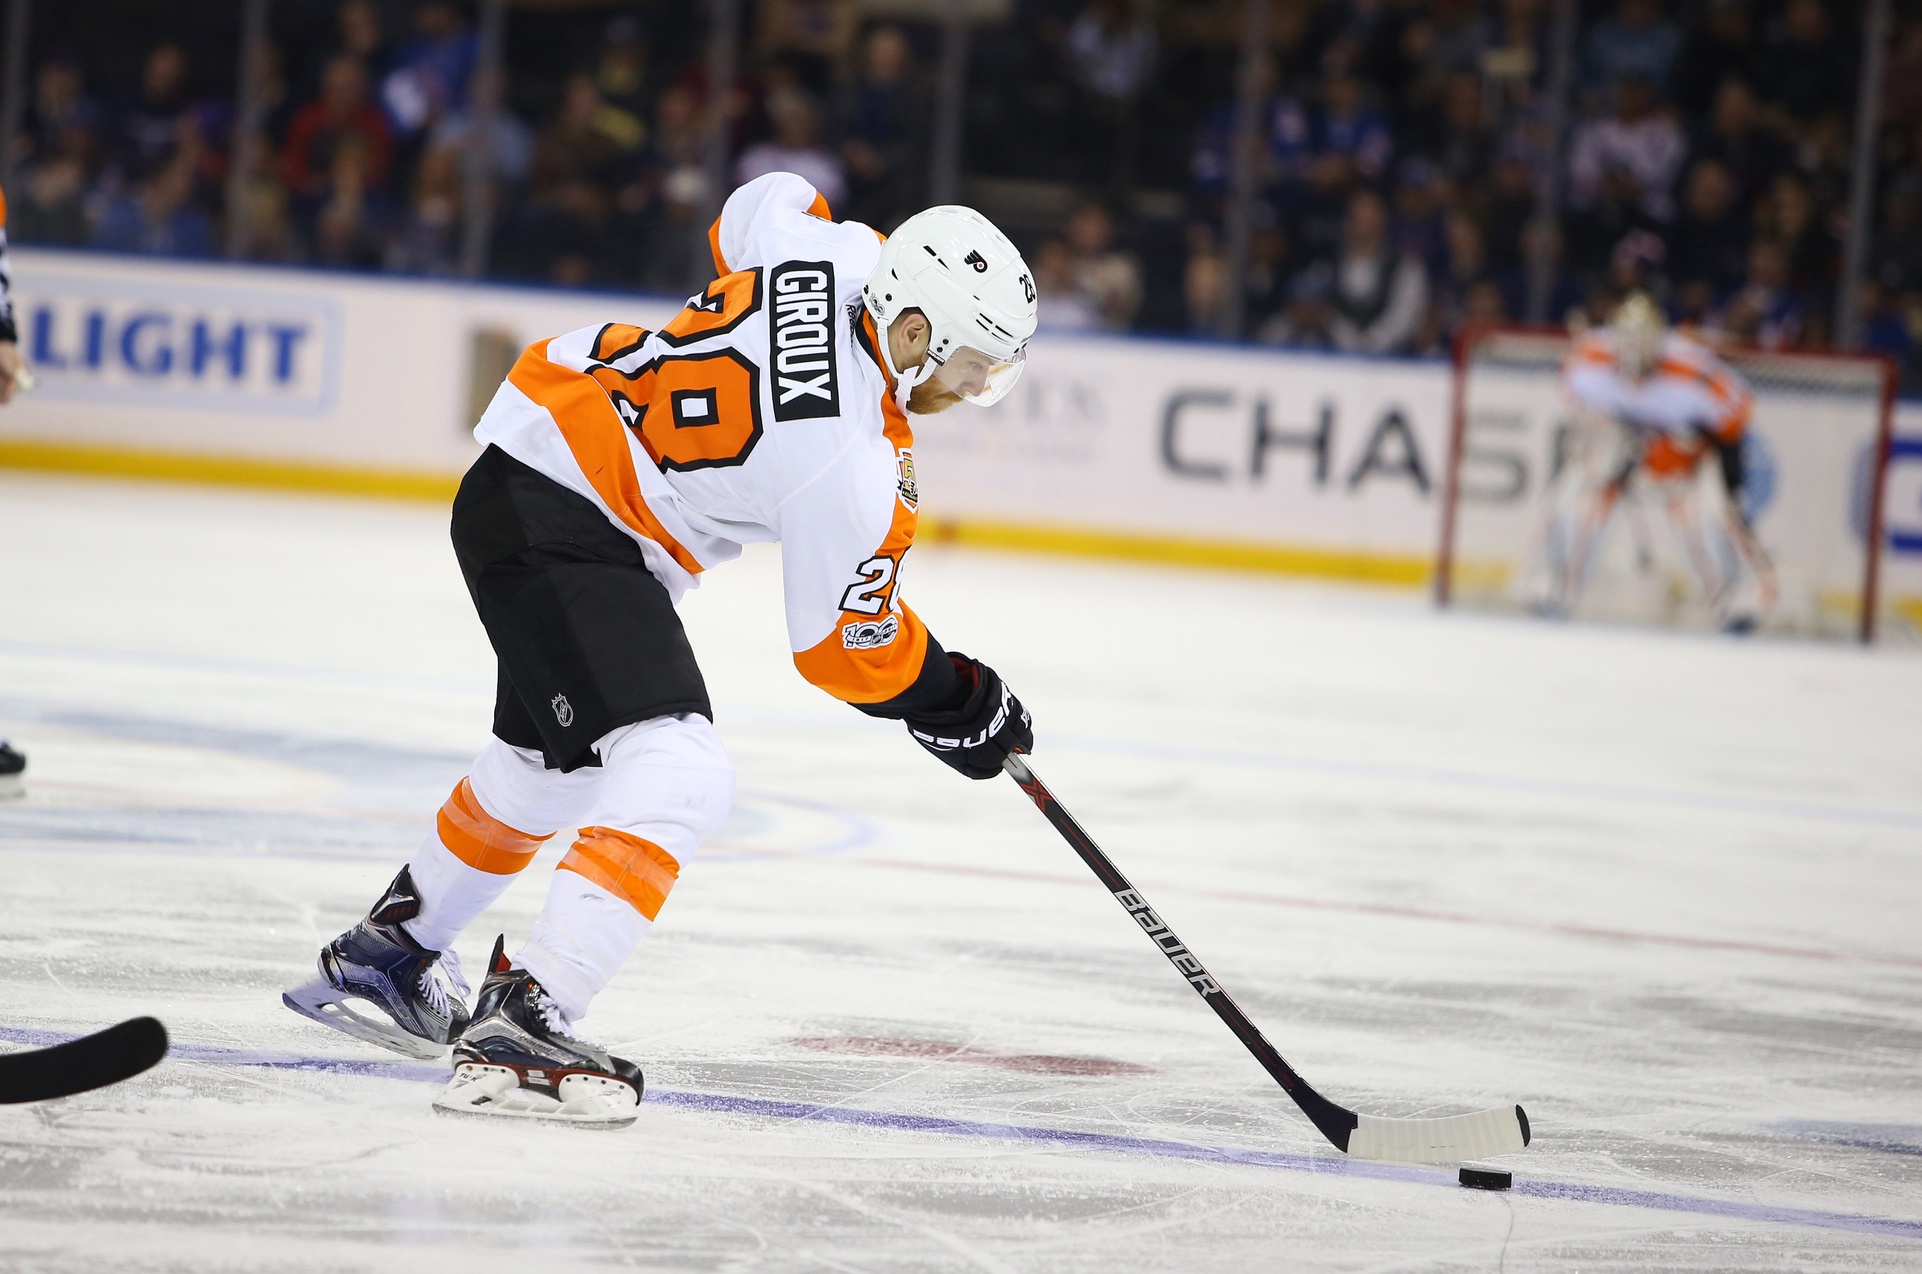 Claude Giroux No Longer the Flyers’ Number One Center… for a Day, Anyway